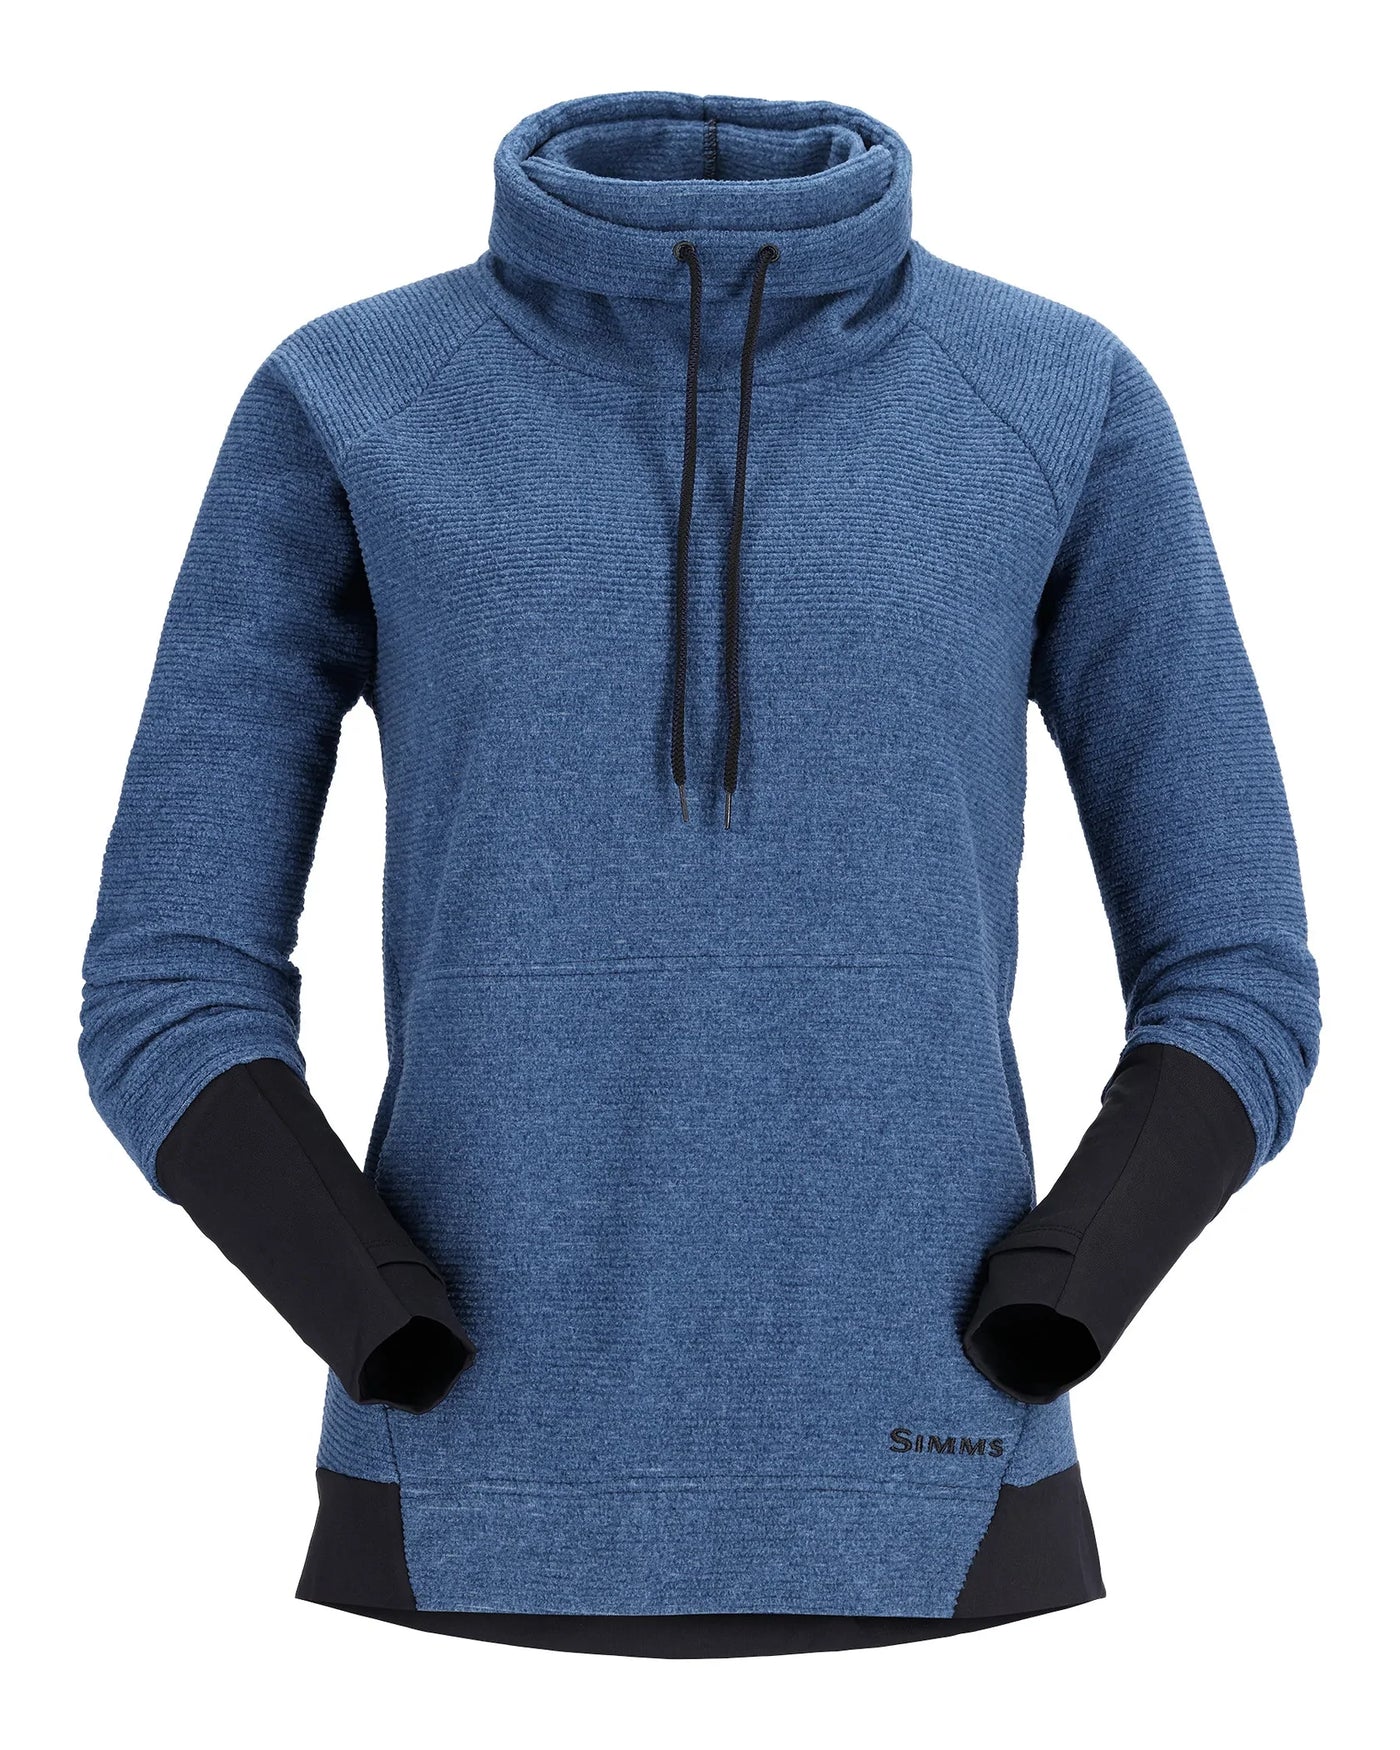 Simms Women’s Rivershed Sweater SALE Now 40% Off!